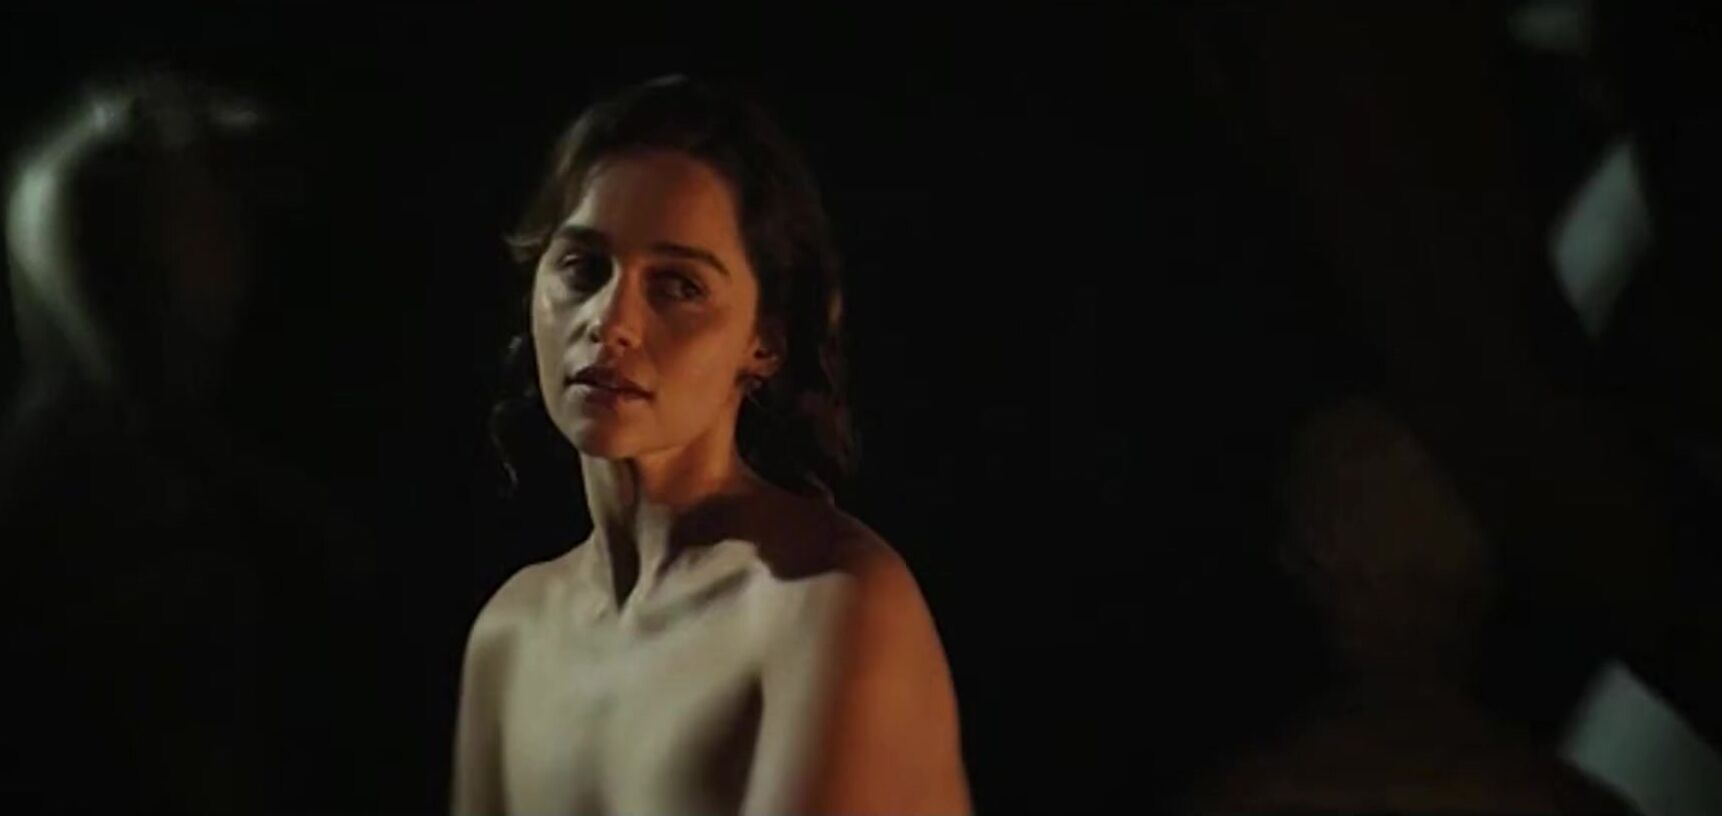 Reality Sometimes Emilia Clarke can't resist booty call and allows co-star to fool around CzechTaxi - 2